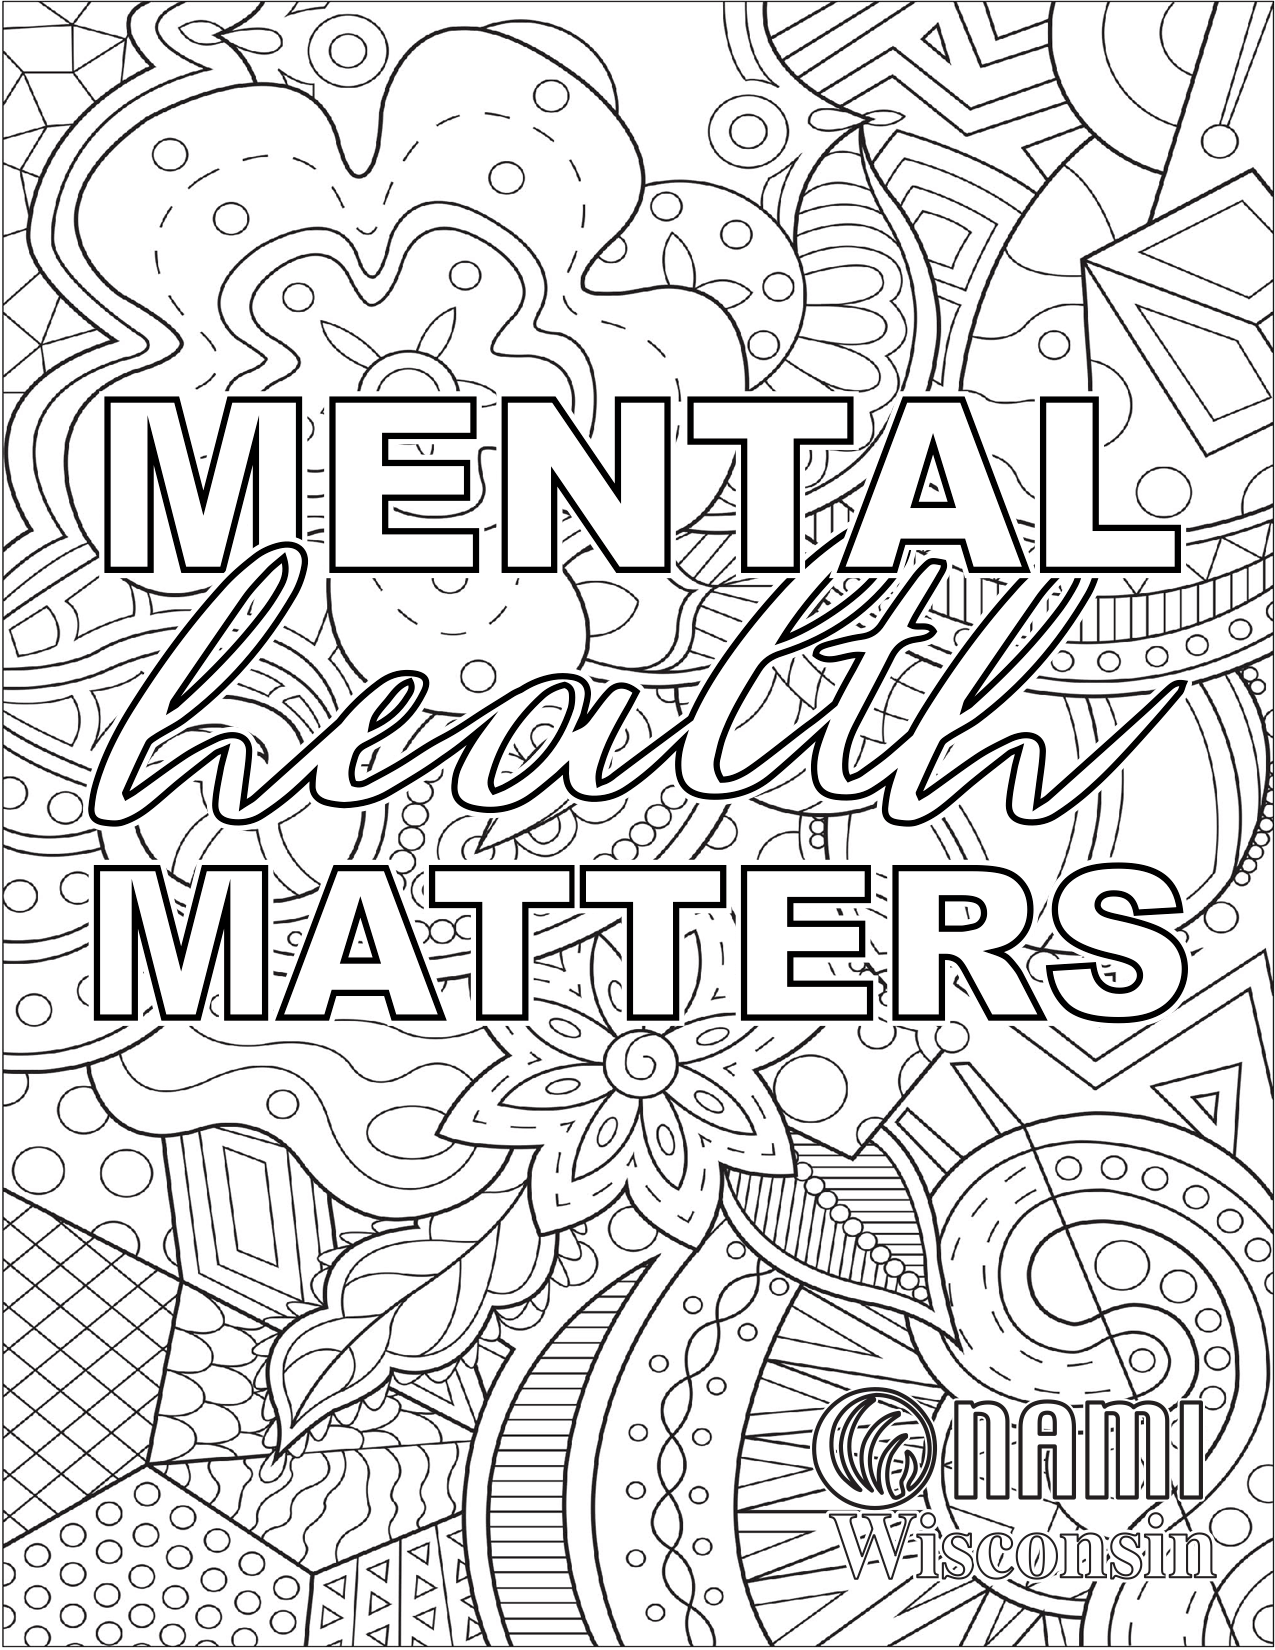 anxiety stress relief coloring pages for adults | mandala stress relief coloring pages for adults | stress relieving coloring pages pdf